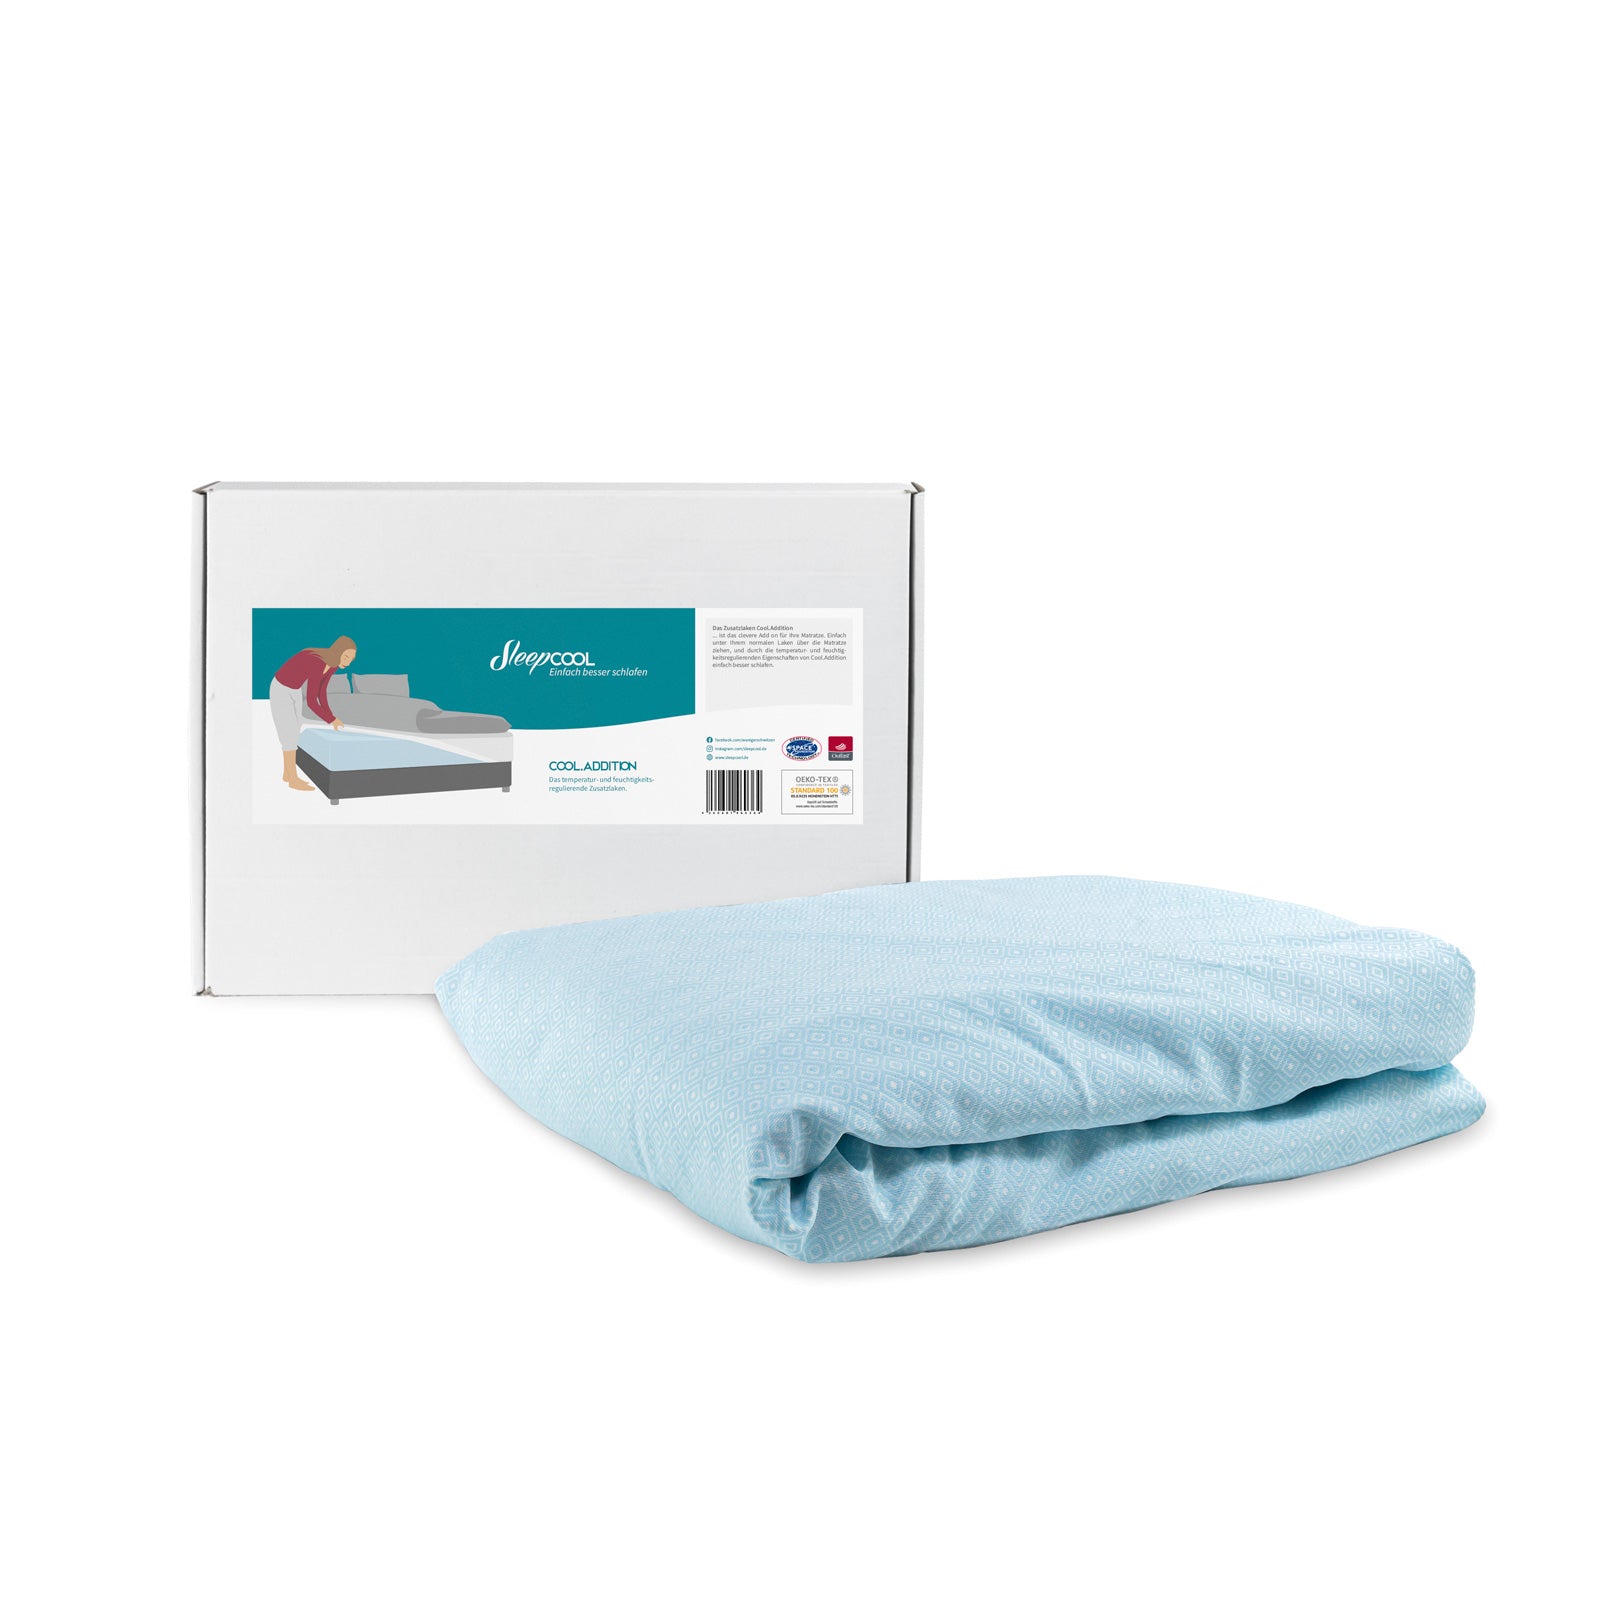 Temperature-regulating additional sheet Cool.ADDITION - Ideal sleeping climate, breathable, sweat less, freeze less